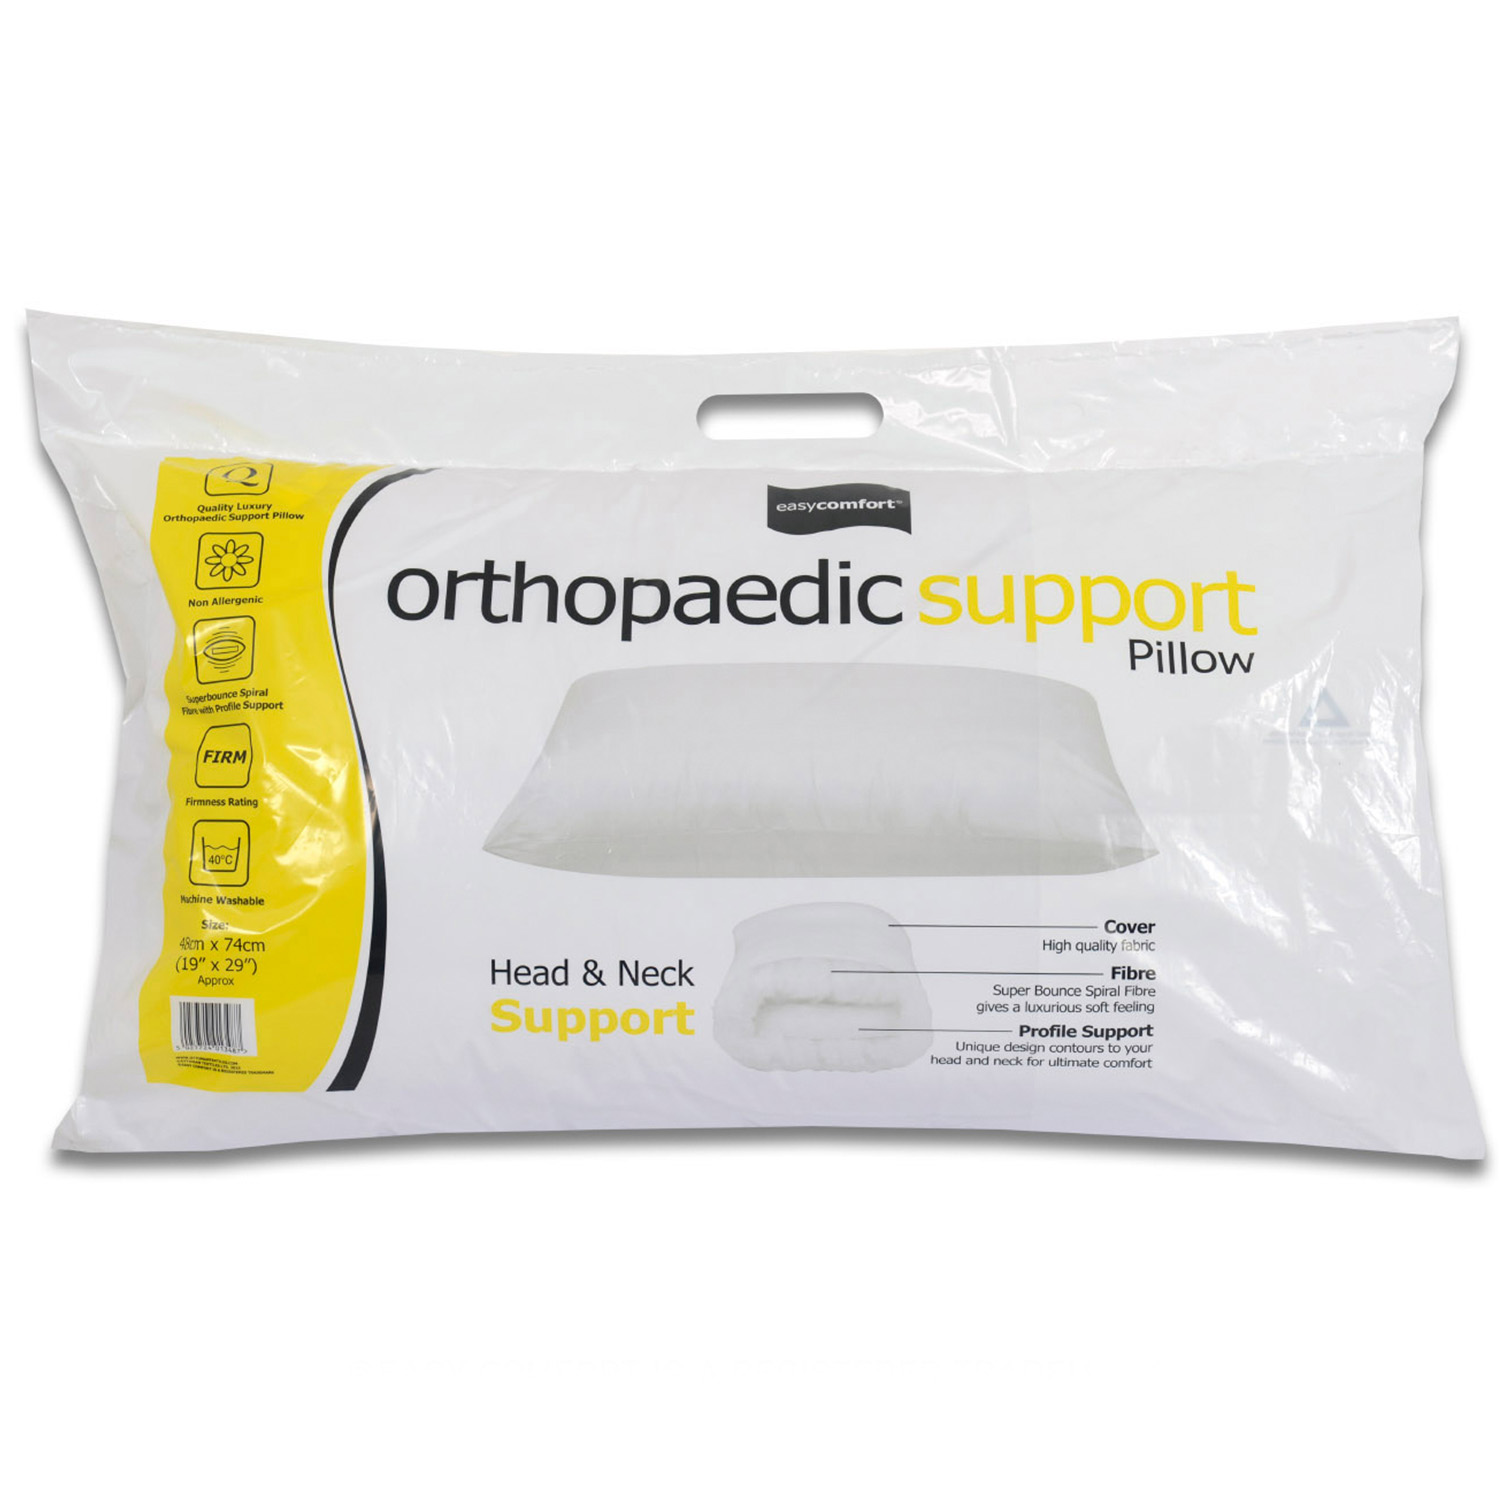 Easycomfort White Orthopaedic Support Pillow Image